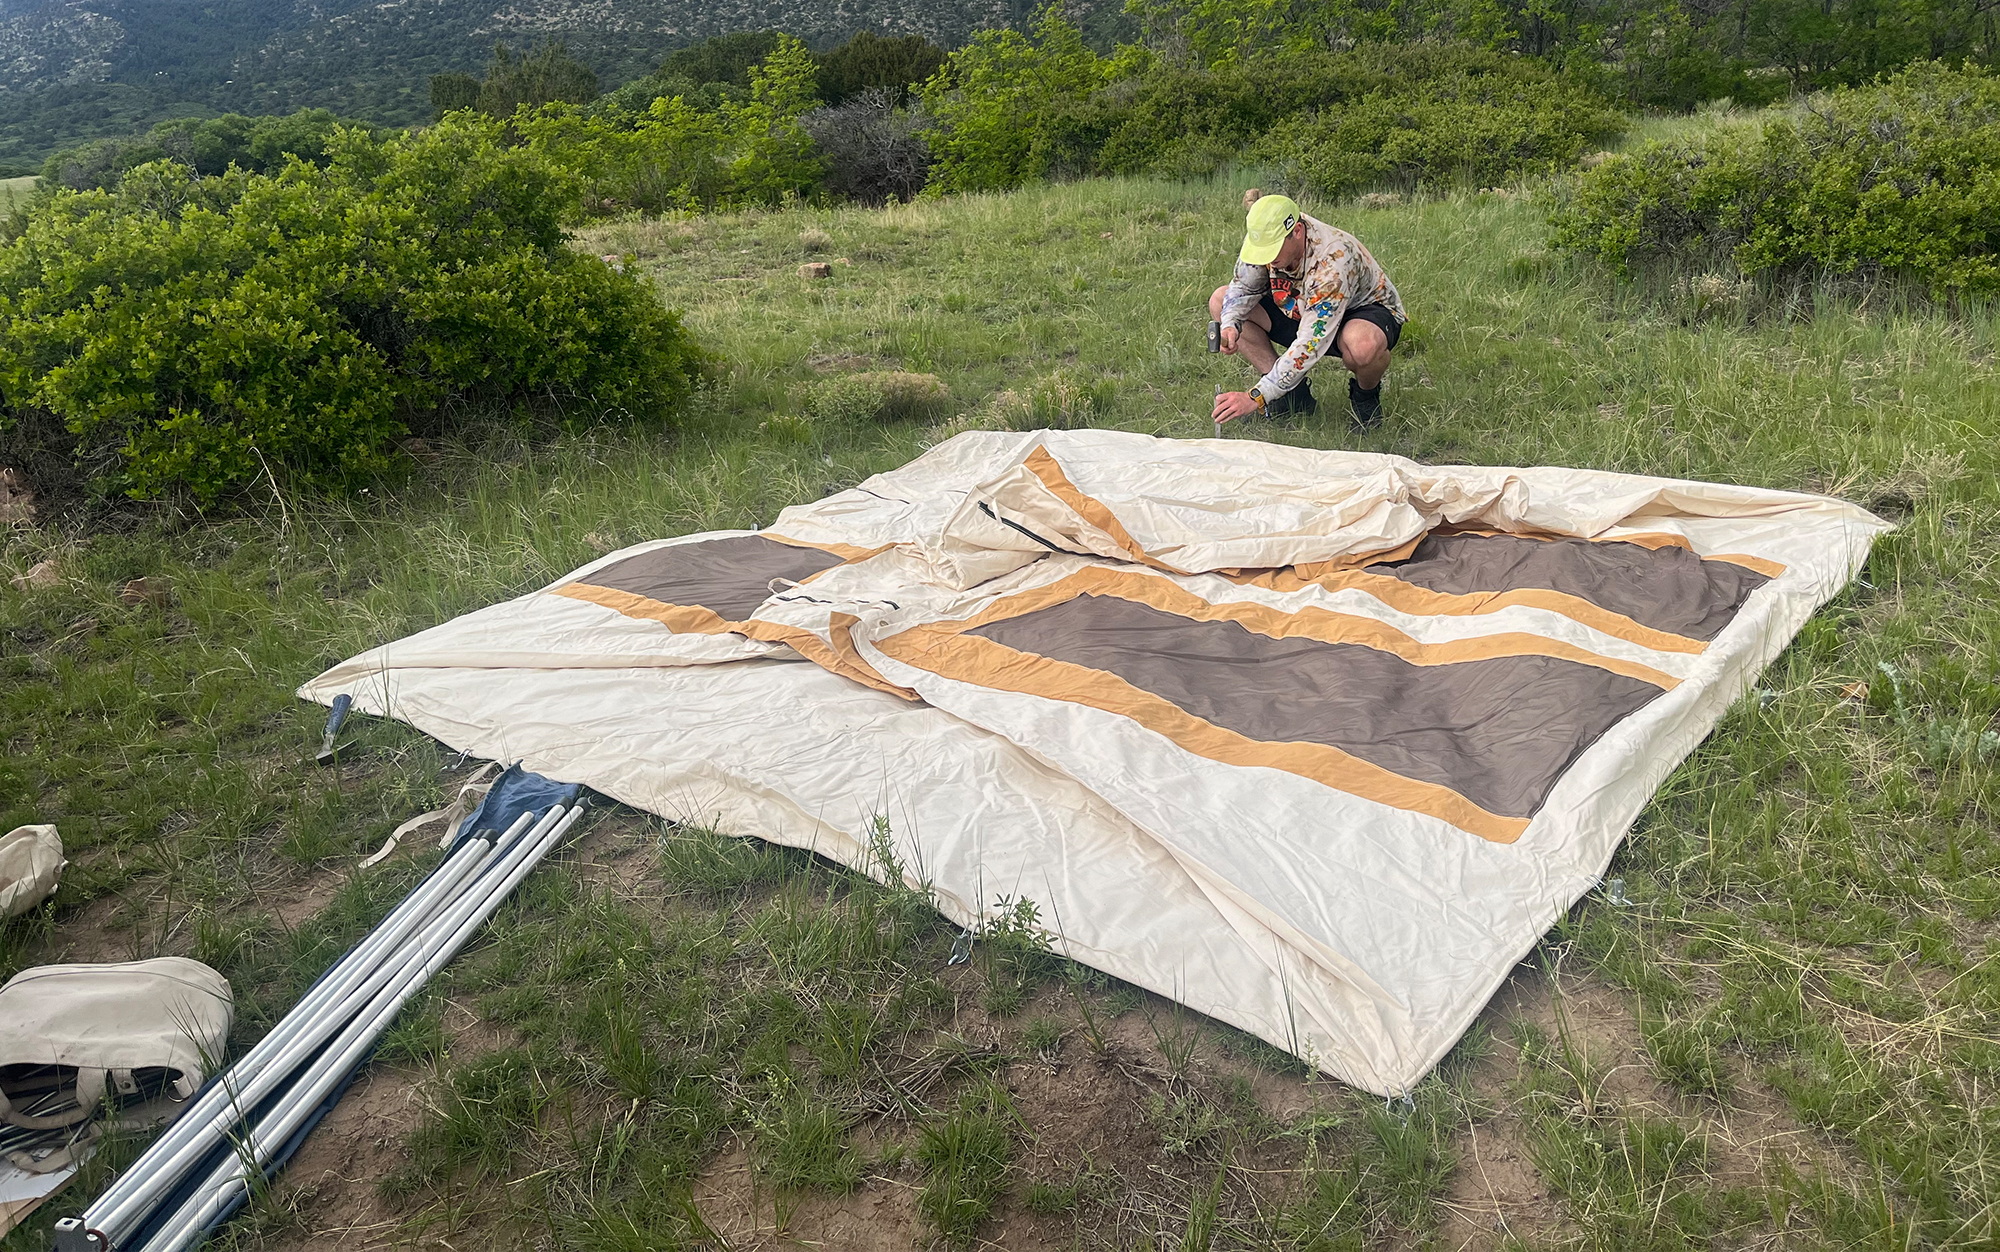 Man stakes down tent.